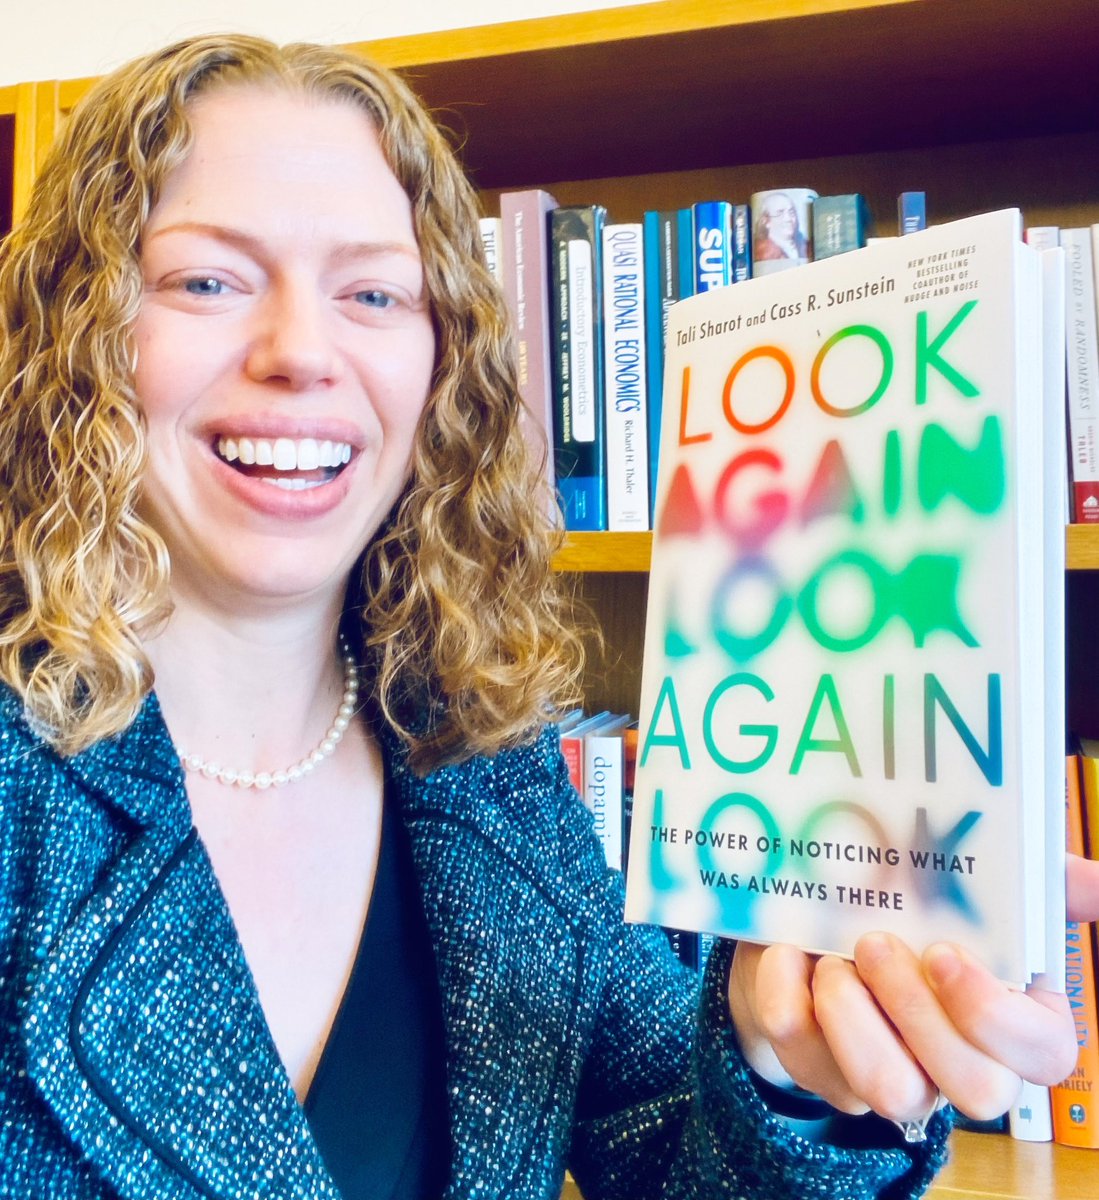 Congratulations to my incredible friends Tali Sharot and @CassSunstein on the publication of their new book LOOK AGAIN! It’s a marvelous tour of the science behind habituation, which can dull our happiness and our humanity. Don’t miss it! 📖